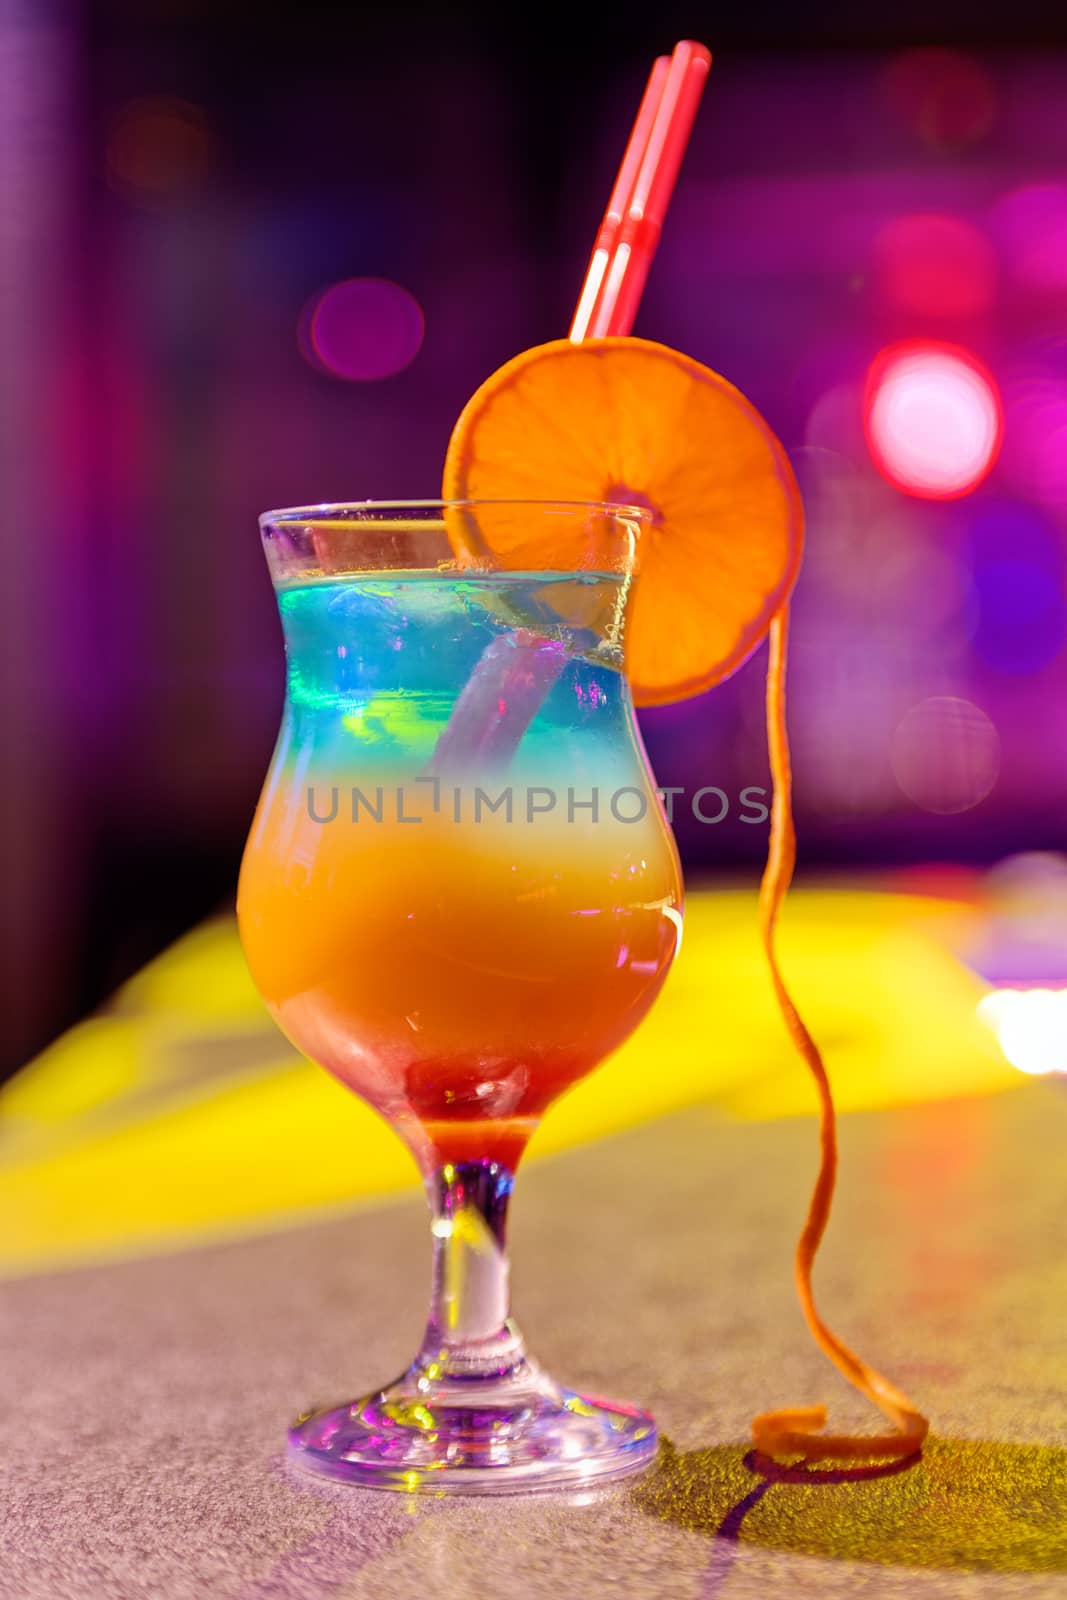 Cocktail at bar in a night club with vivid colors by vladimirnenezic